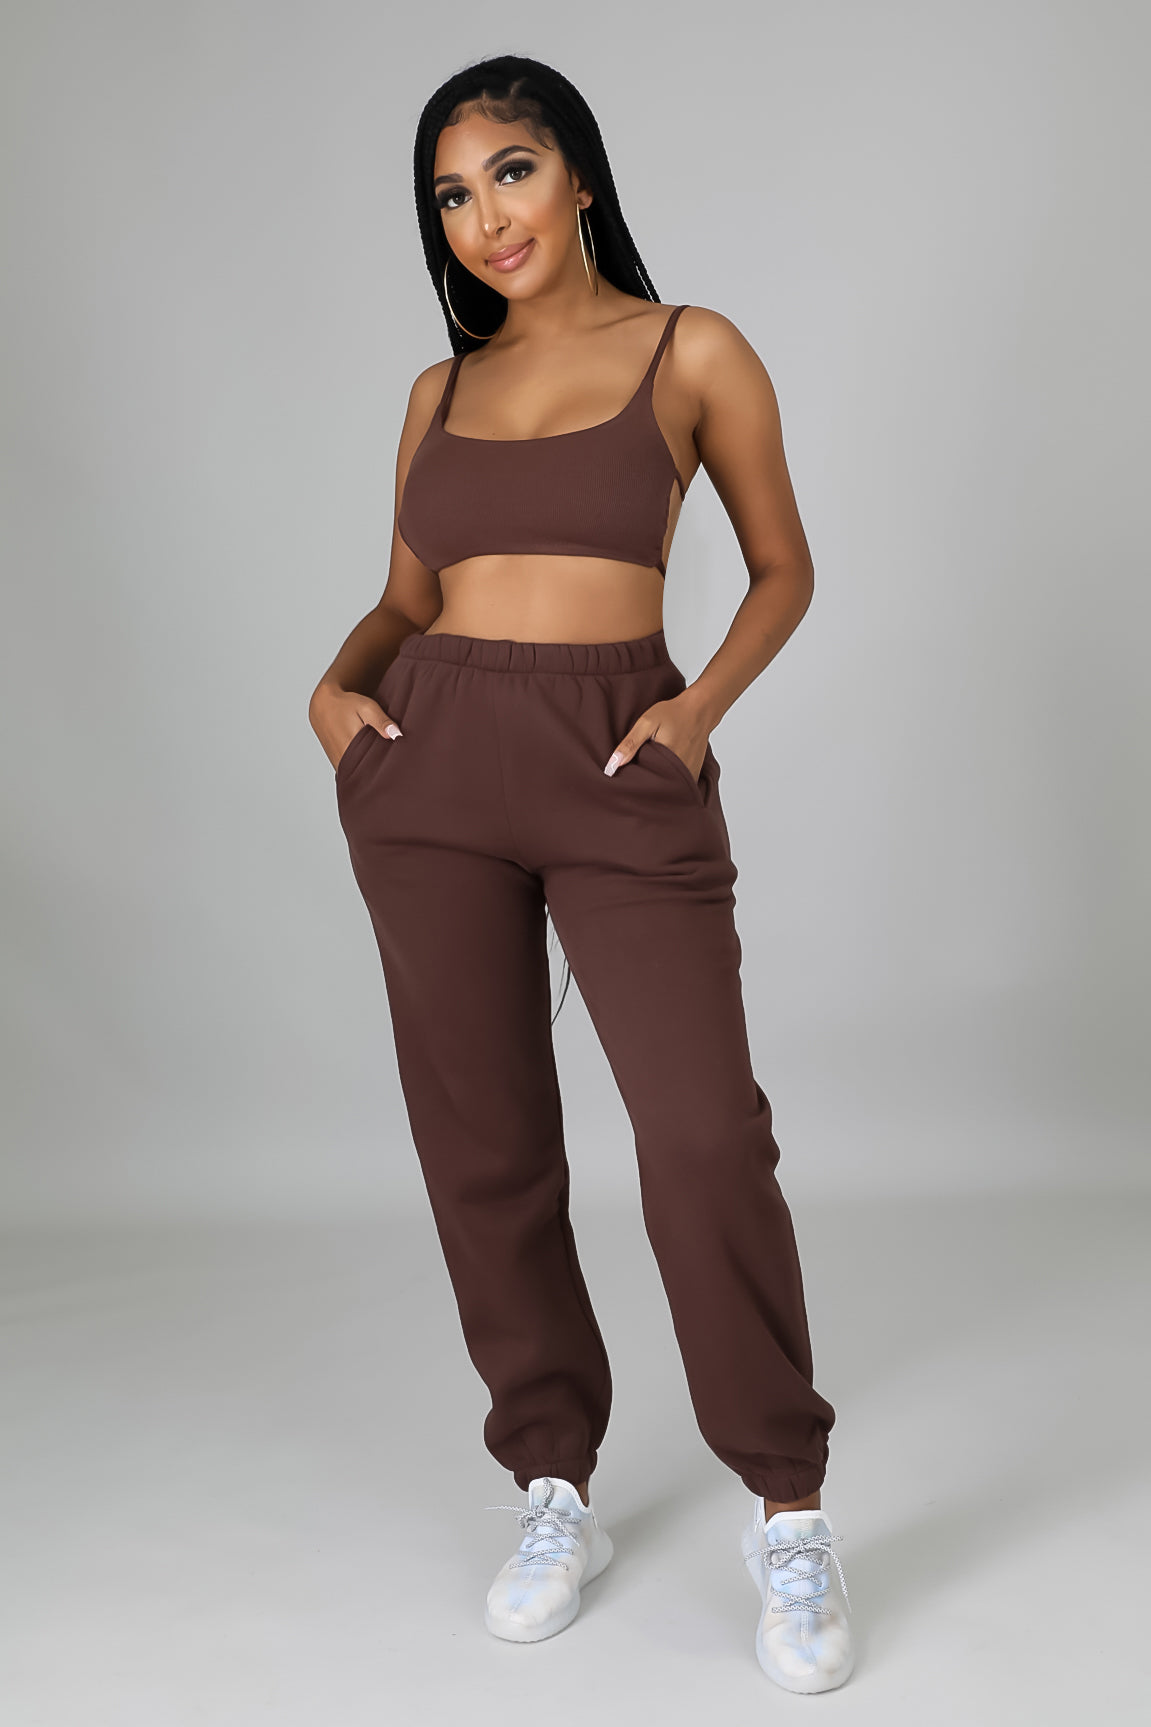 Late Night Convos Pant Set